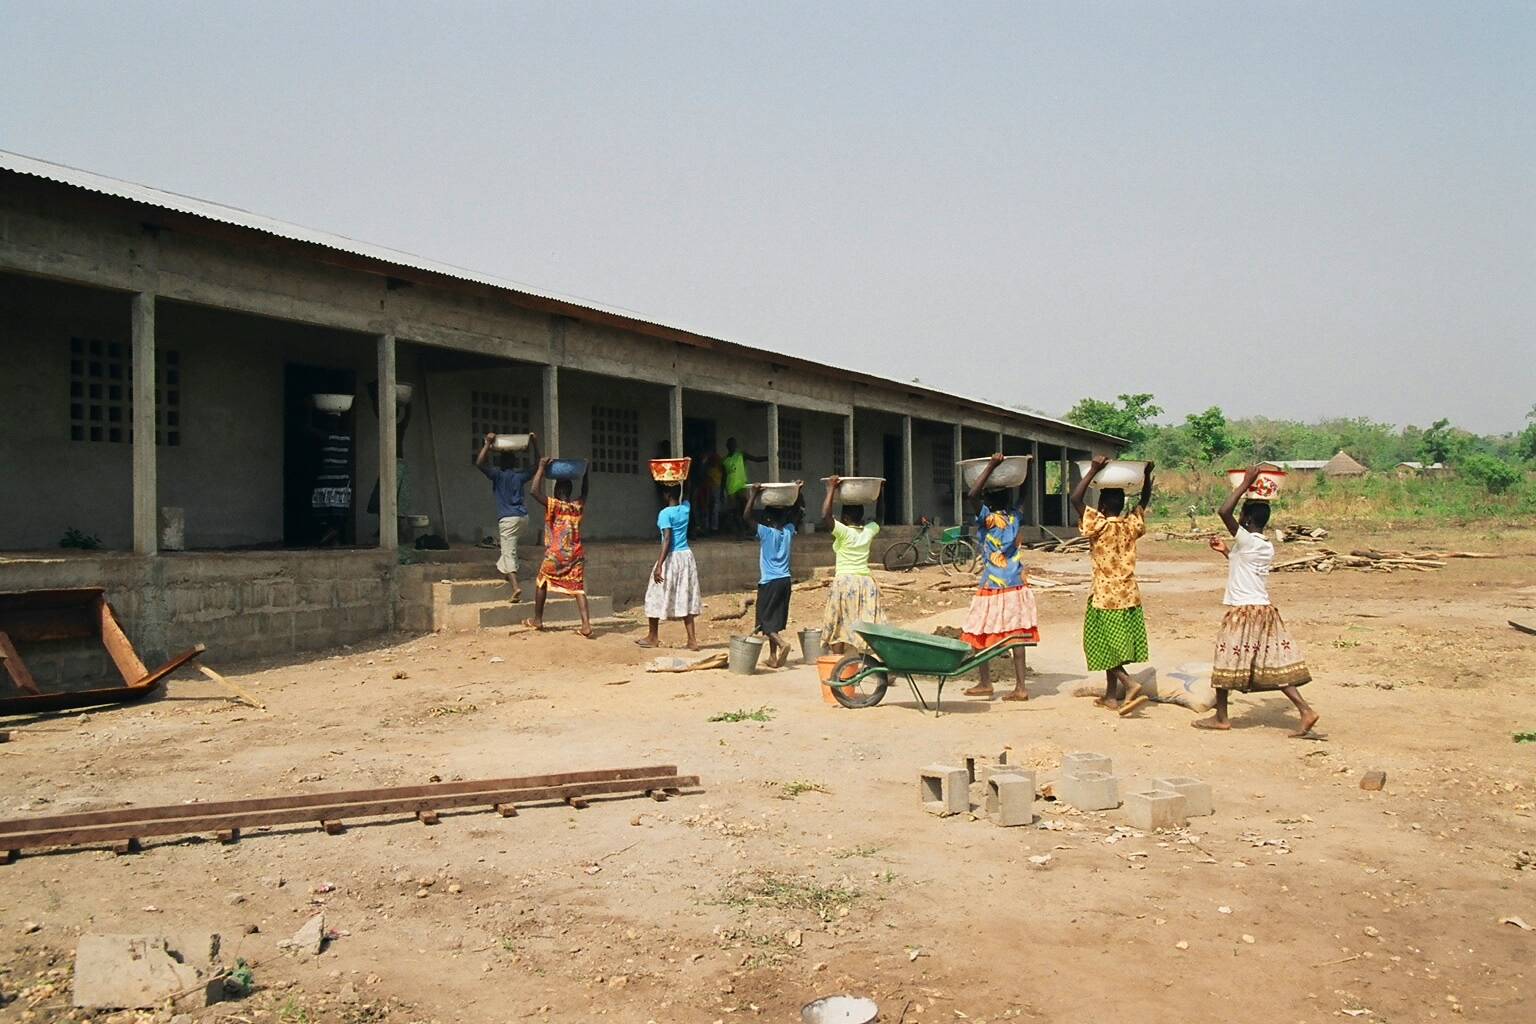 Courtesy photo / Mary McEwen 
Students help build a secondary school funded by a Peace Corps grant in Dimori, Togo in 2004. Now, a Juneau woman who helped get the first school built is helping to fund a new larger school to meet expanded demand.